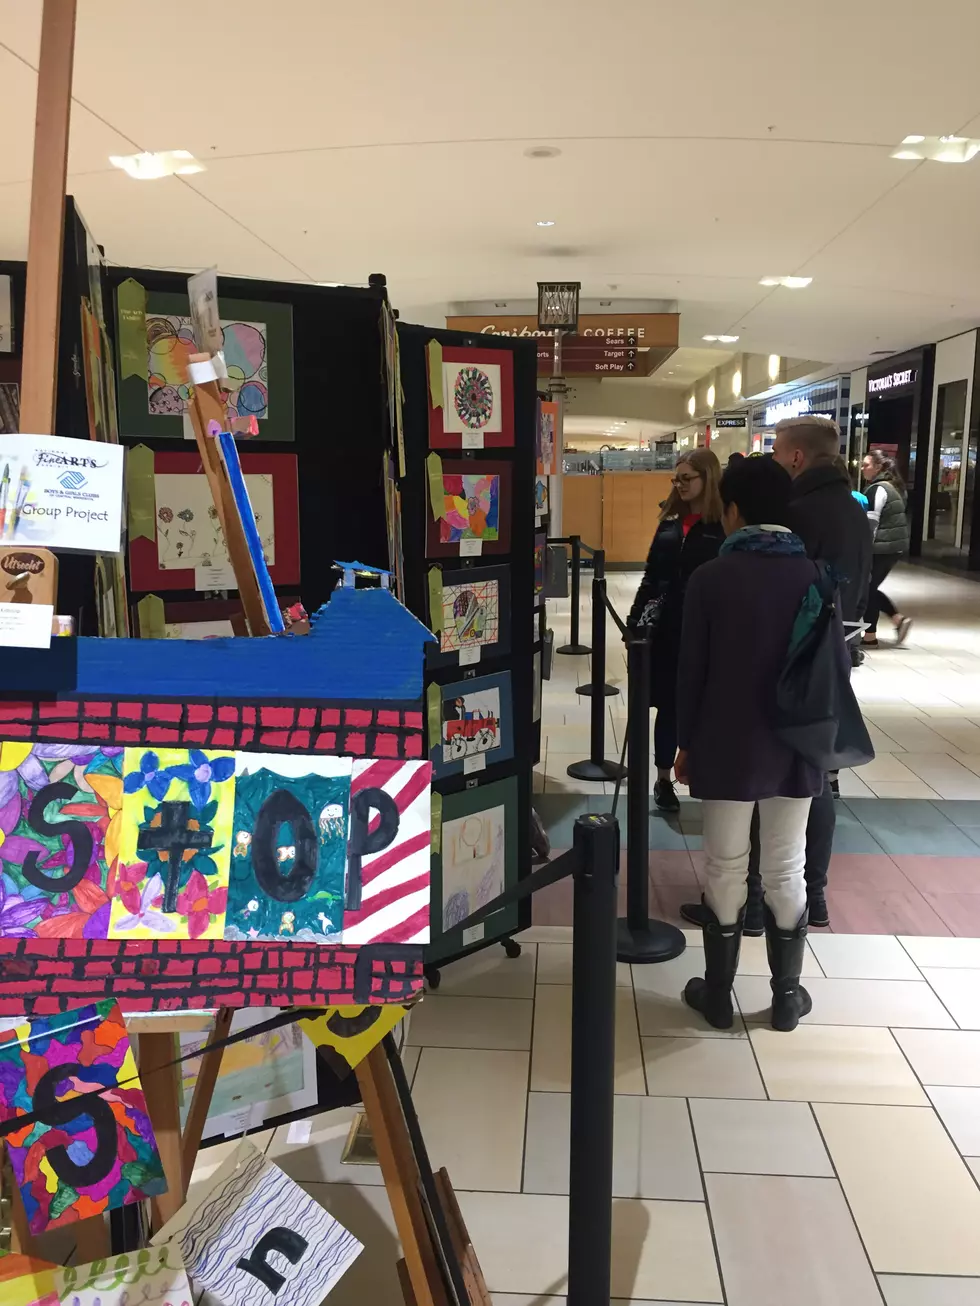 The 2017 Fine Arts Exhibit On Display At Crossroads Shopping Center